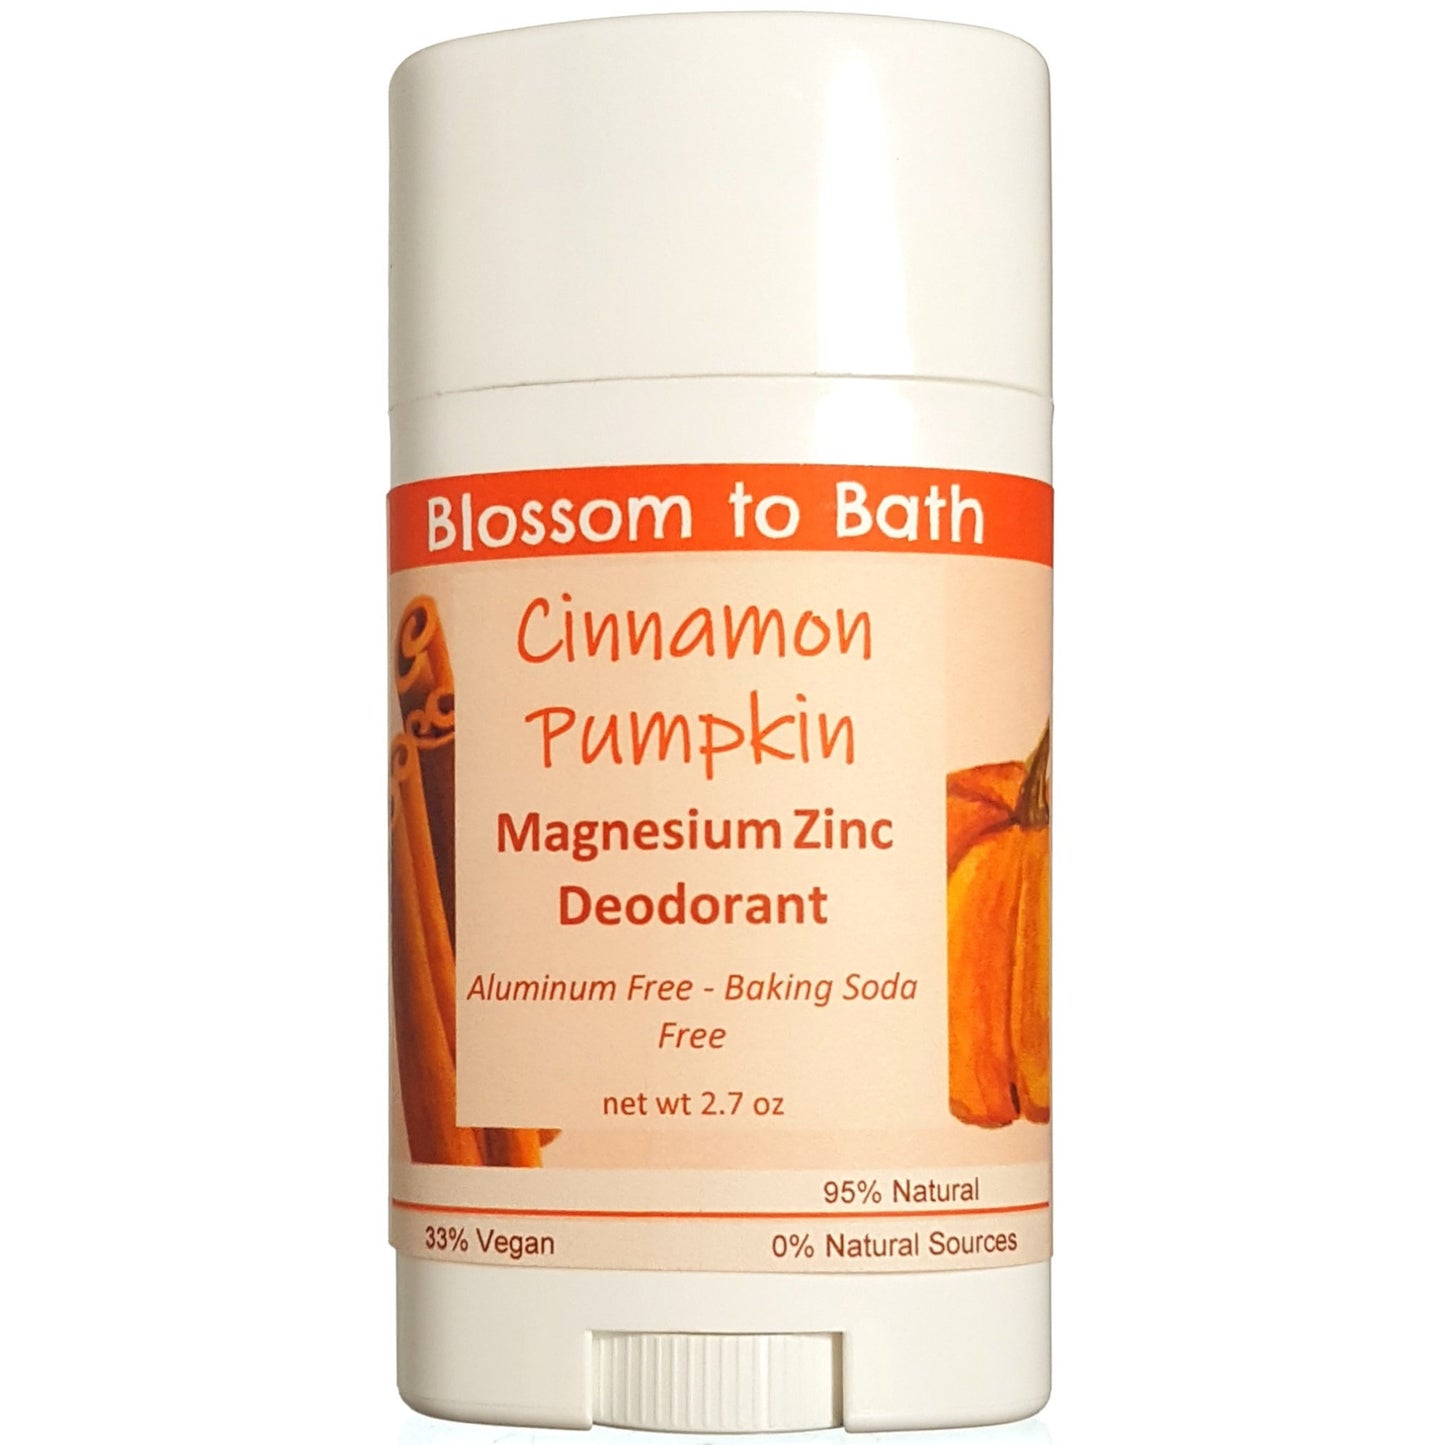 Buy Blossom to Bath Cinnamon Pumpkin Magnesium Zinc Deodorant from Flowersong Soap Studio.  Long lasting protection made from organic botanicals and butters, made without baking soda, tested in the Arizona heat  An engaging, cheerful scent filled with sweet vanilla and warm spice.